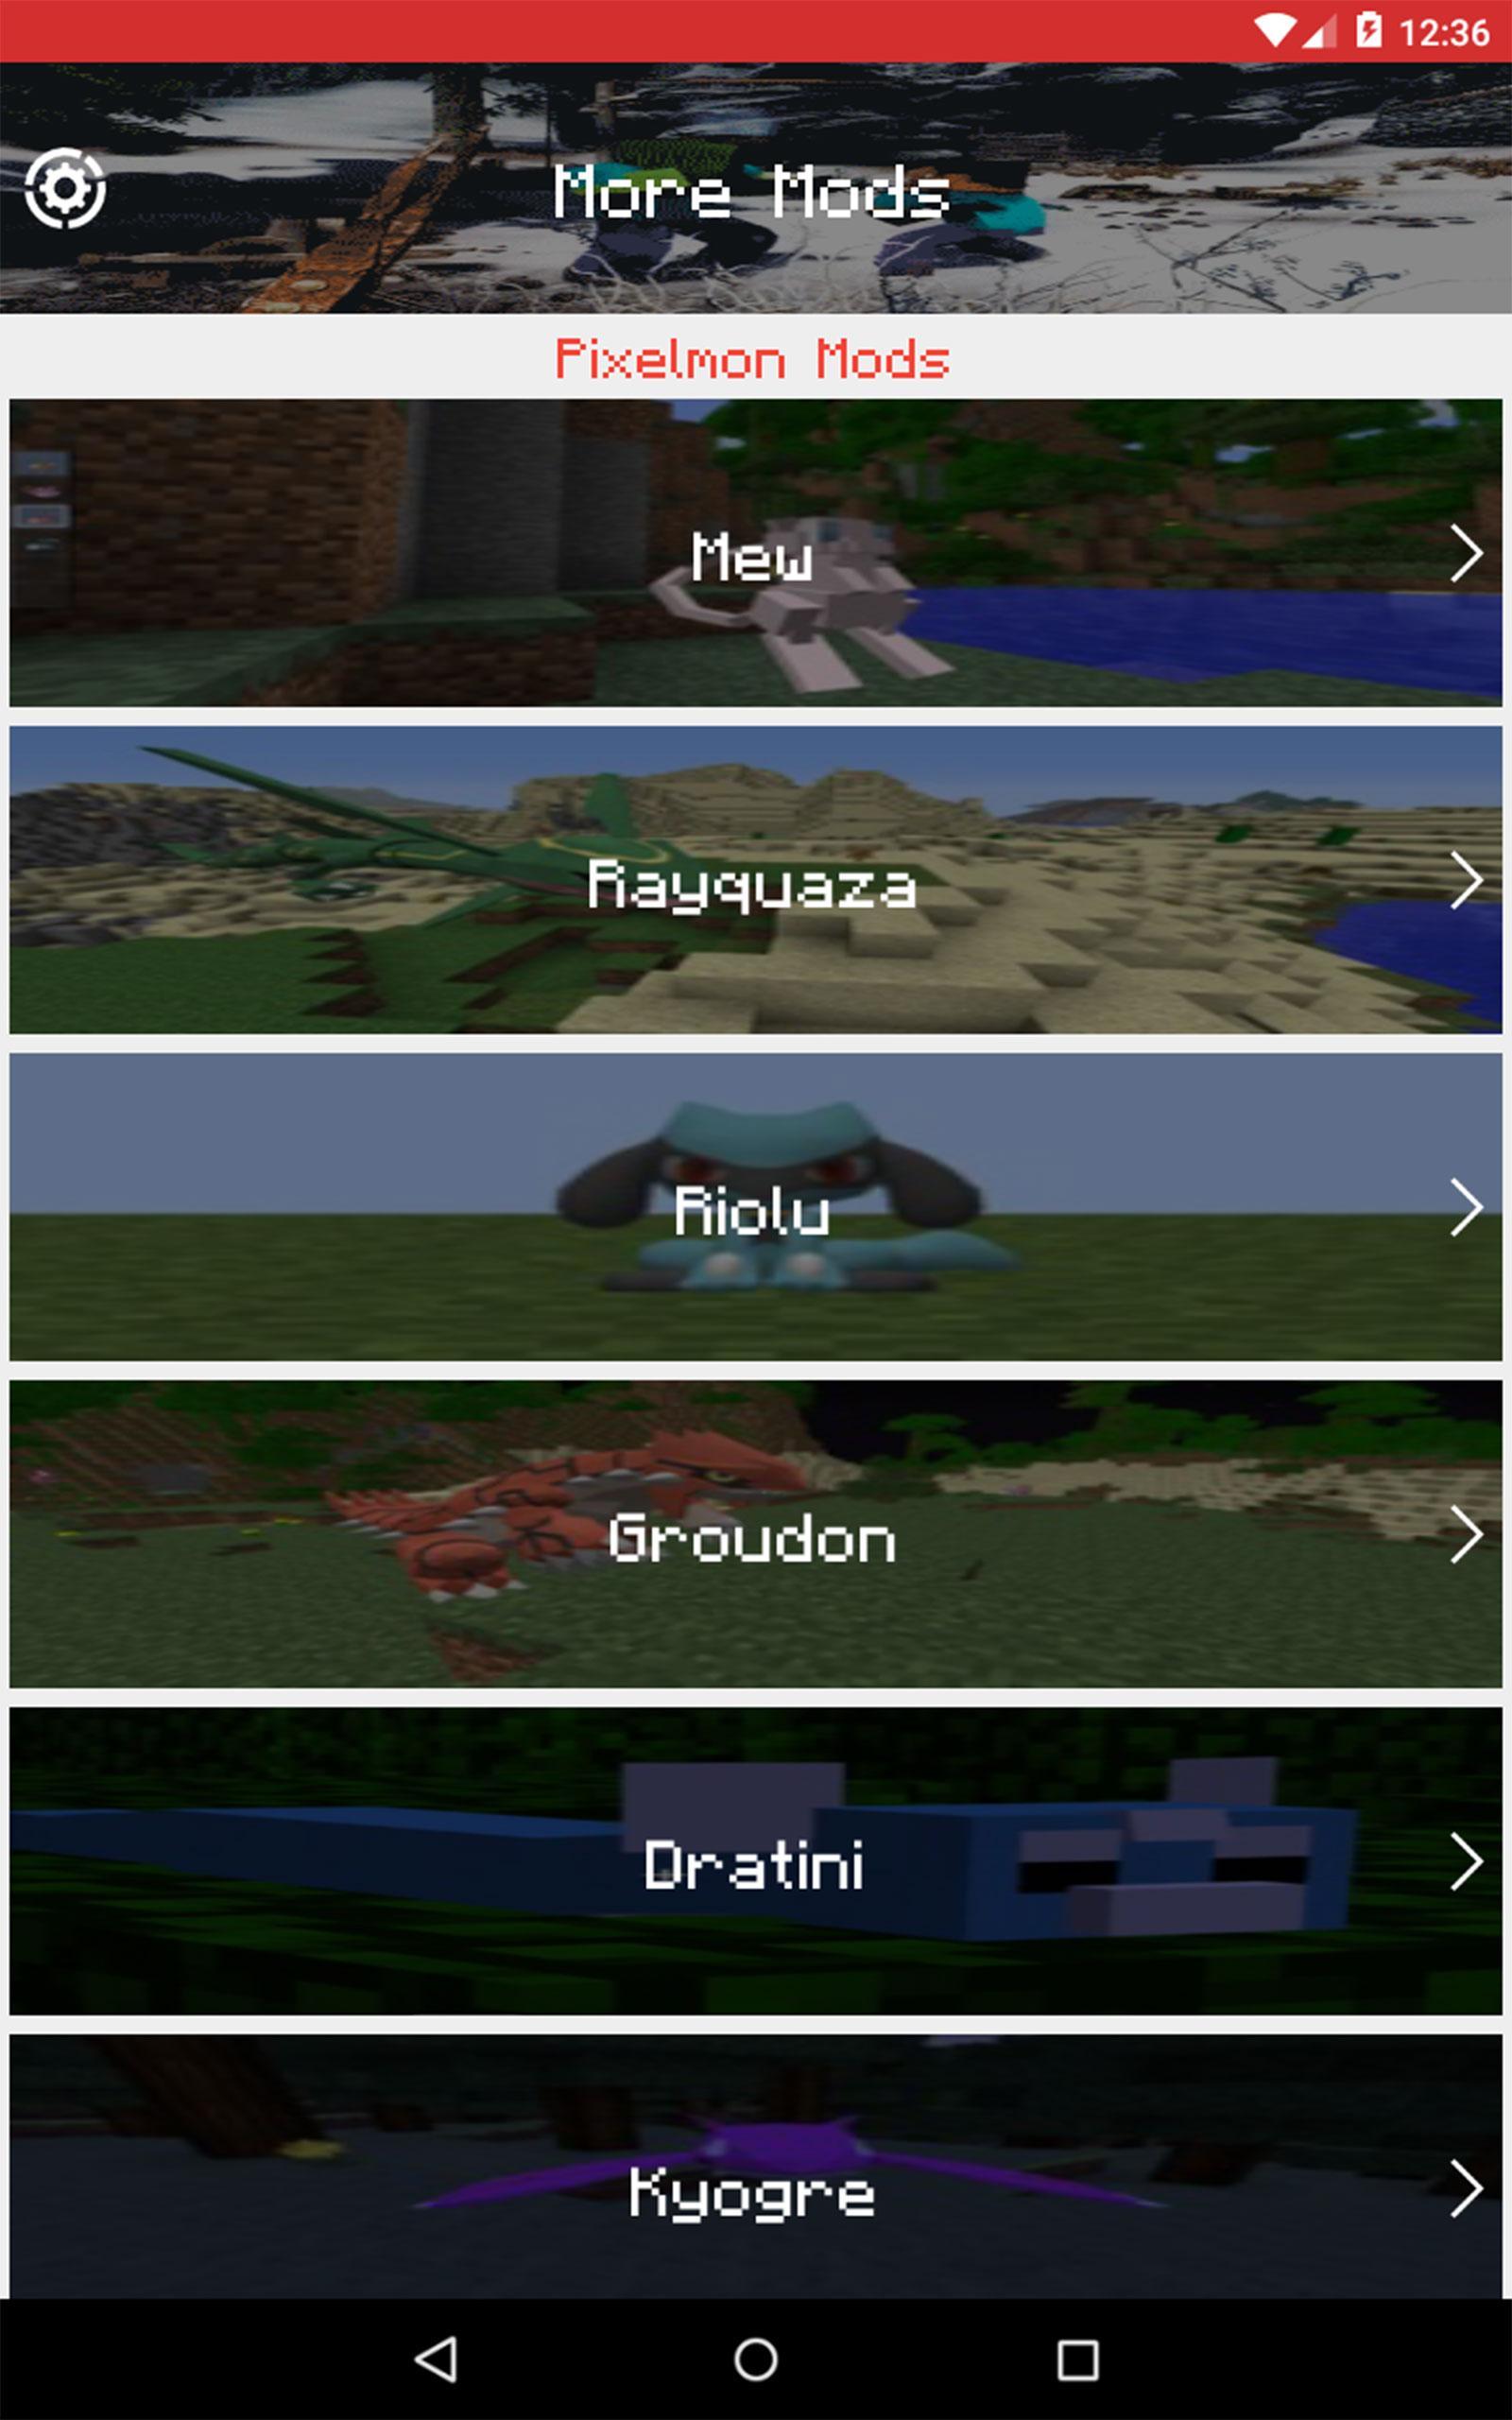 Pixelmon Mod For Minecraft Pc For Android Apk Download